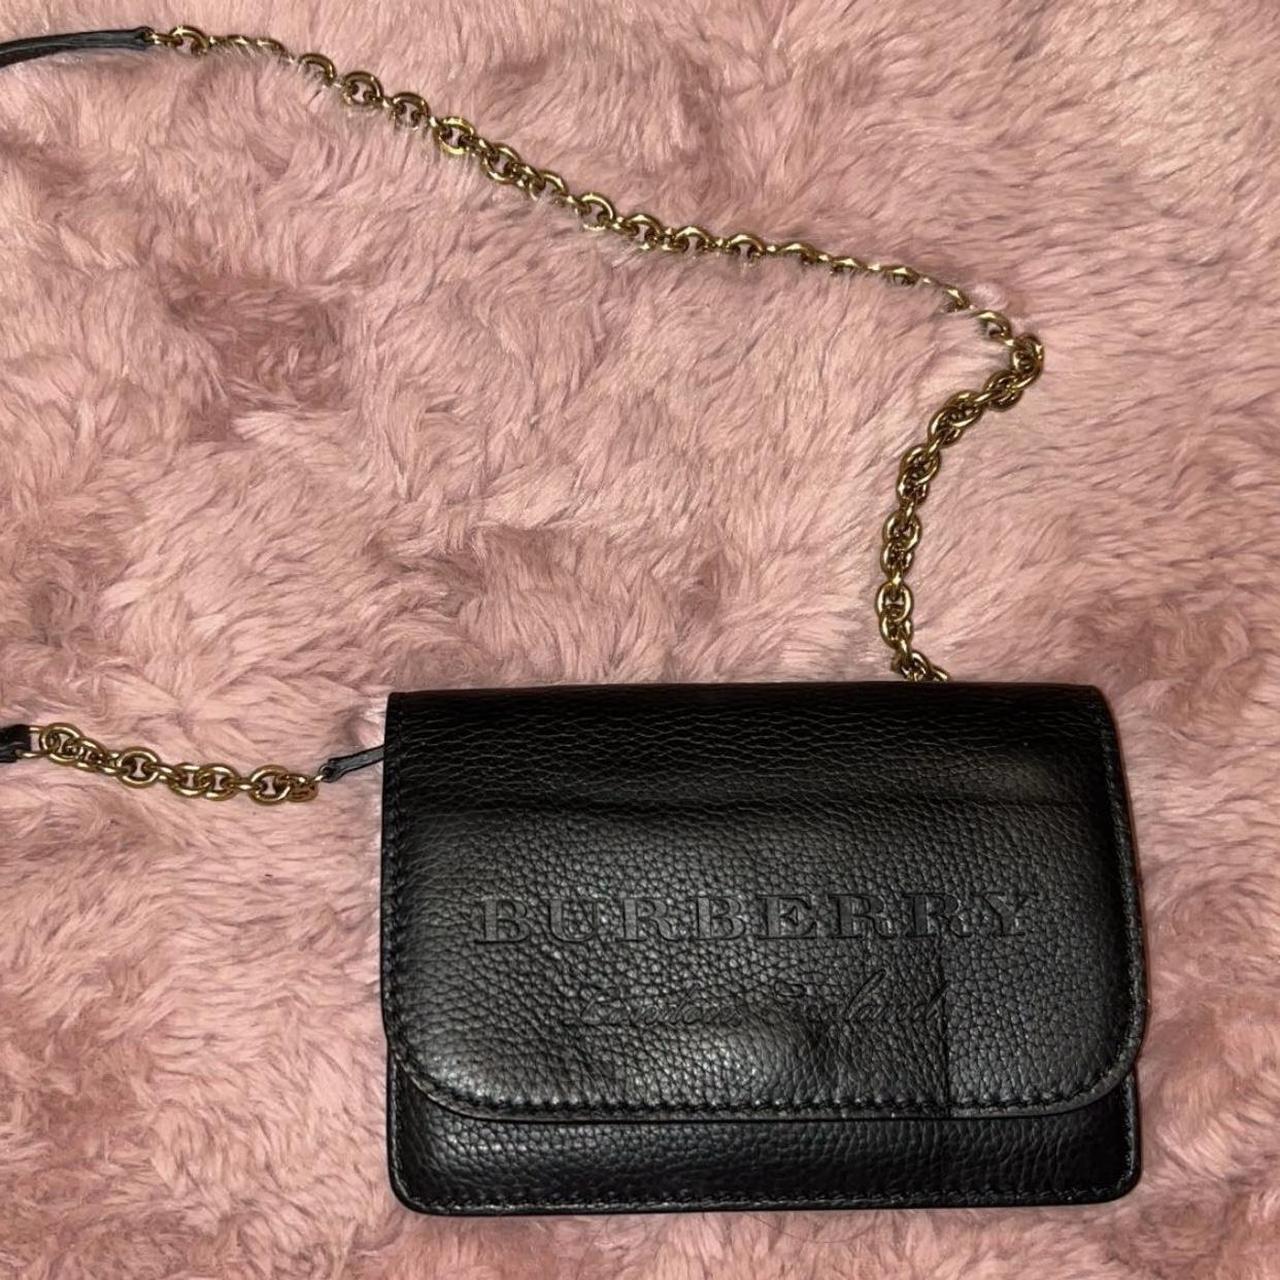 Burberry Purse - clothing & accessories - by owner - apparel sale -  craigslist